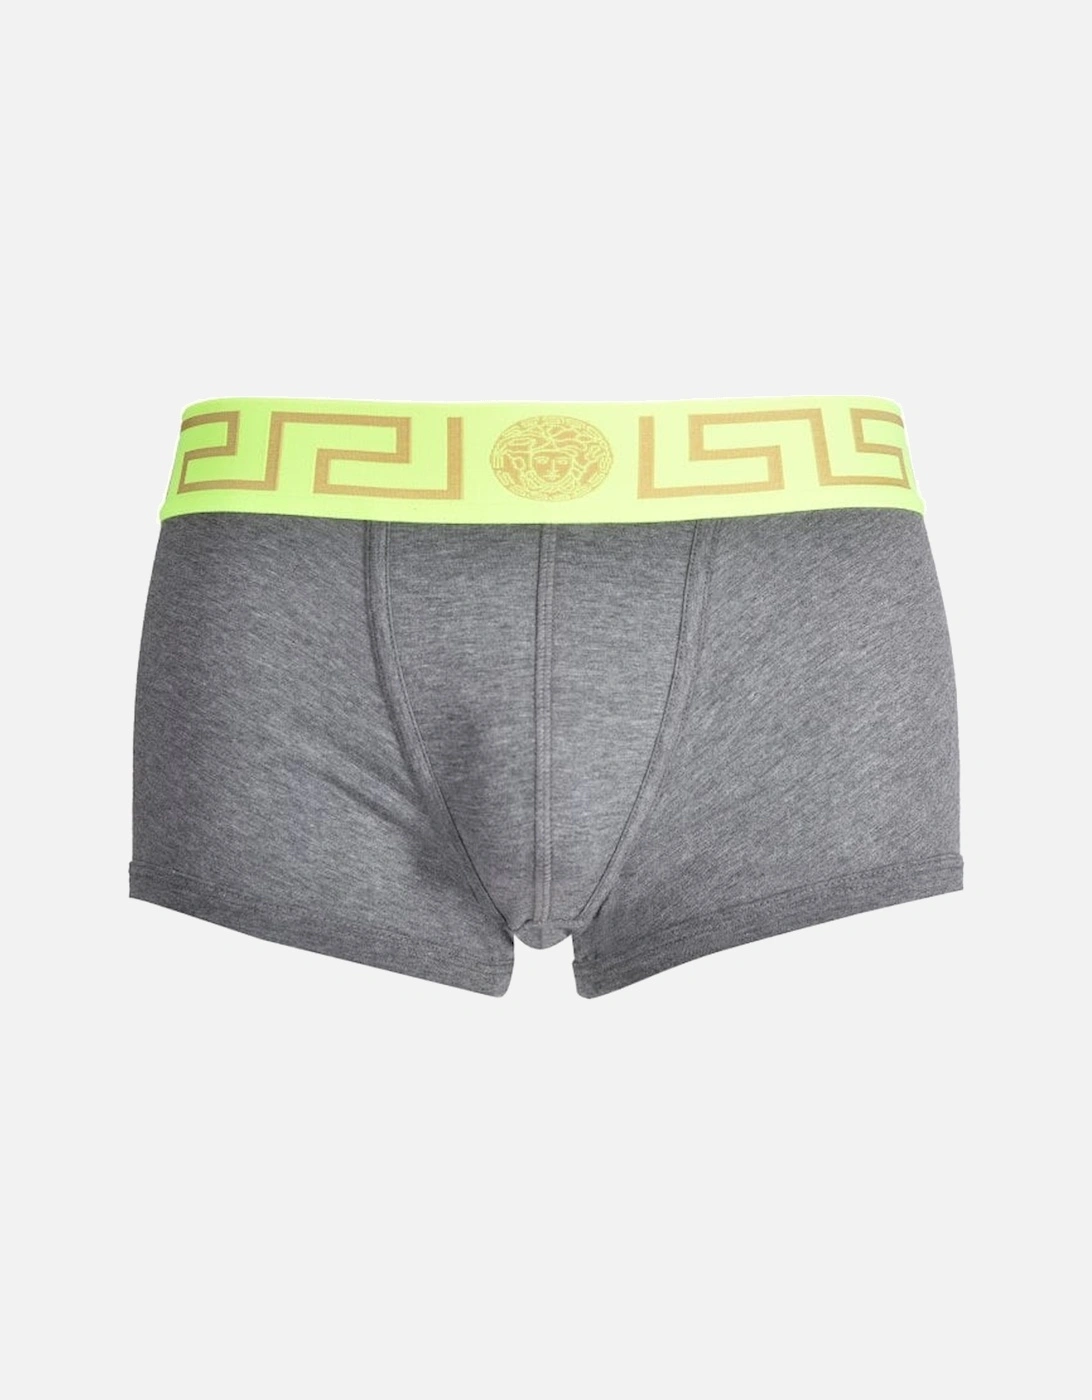 Iconic Greca Low-Rise Boxer Trunk, Grey and Neon Yellow, 4 of 3